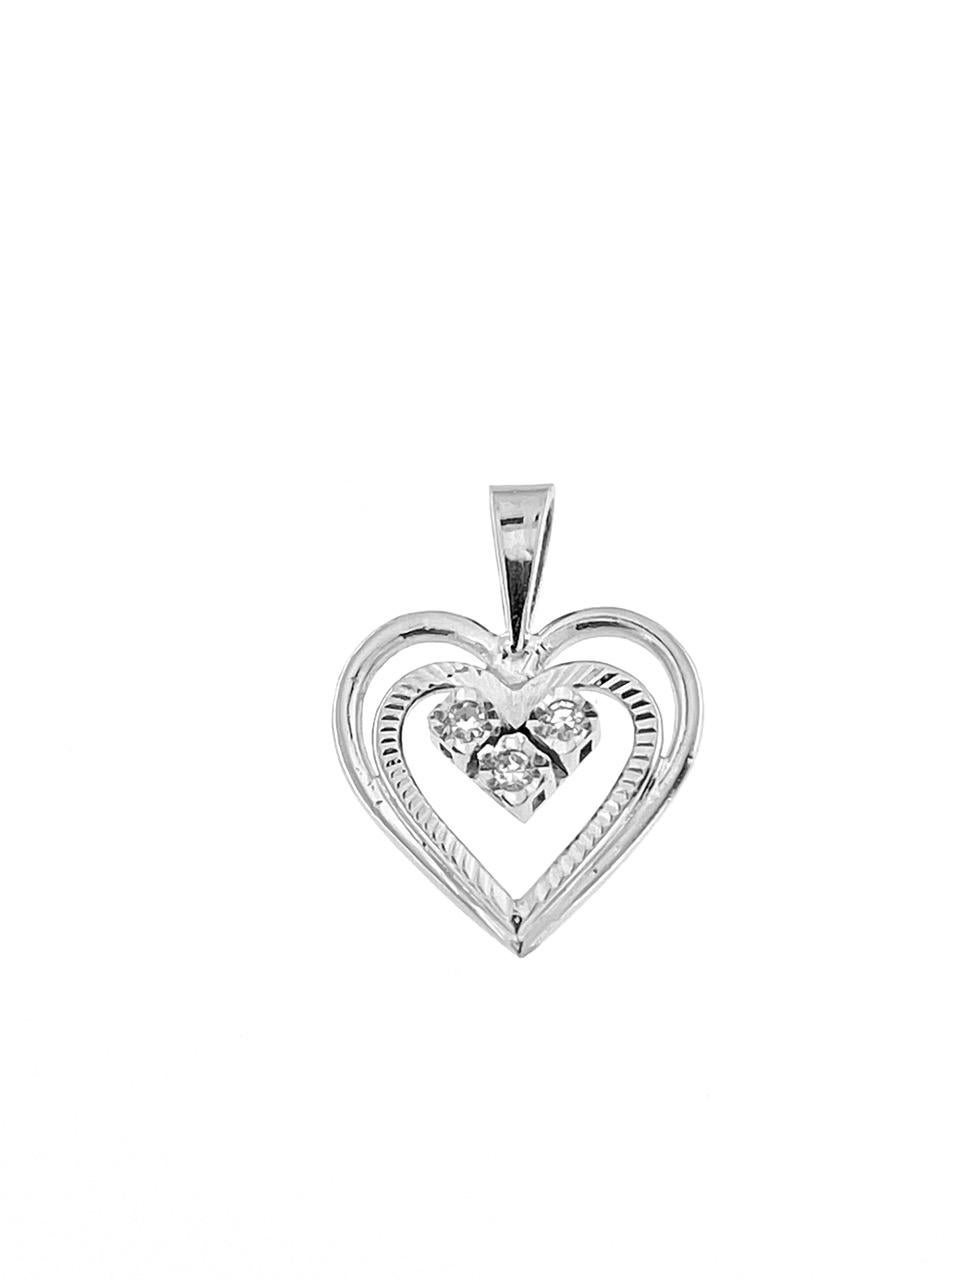 The Spanish Double Heart Pendant in White Gold with Diamonds is a romantic piece of jewelry that showcases intricate craftsmanship and elegance. Crafted from 18-karat white gold, this pendant features a unique design with two intertwined hearts,